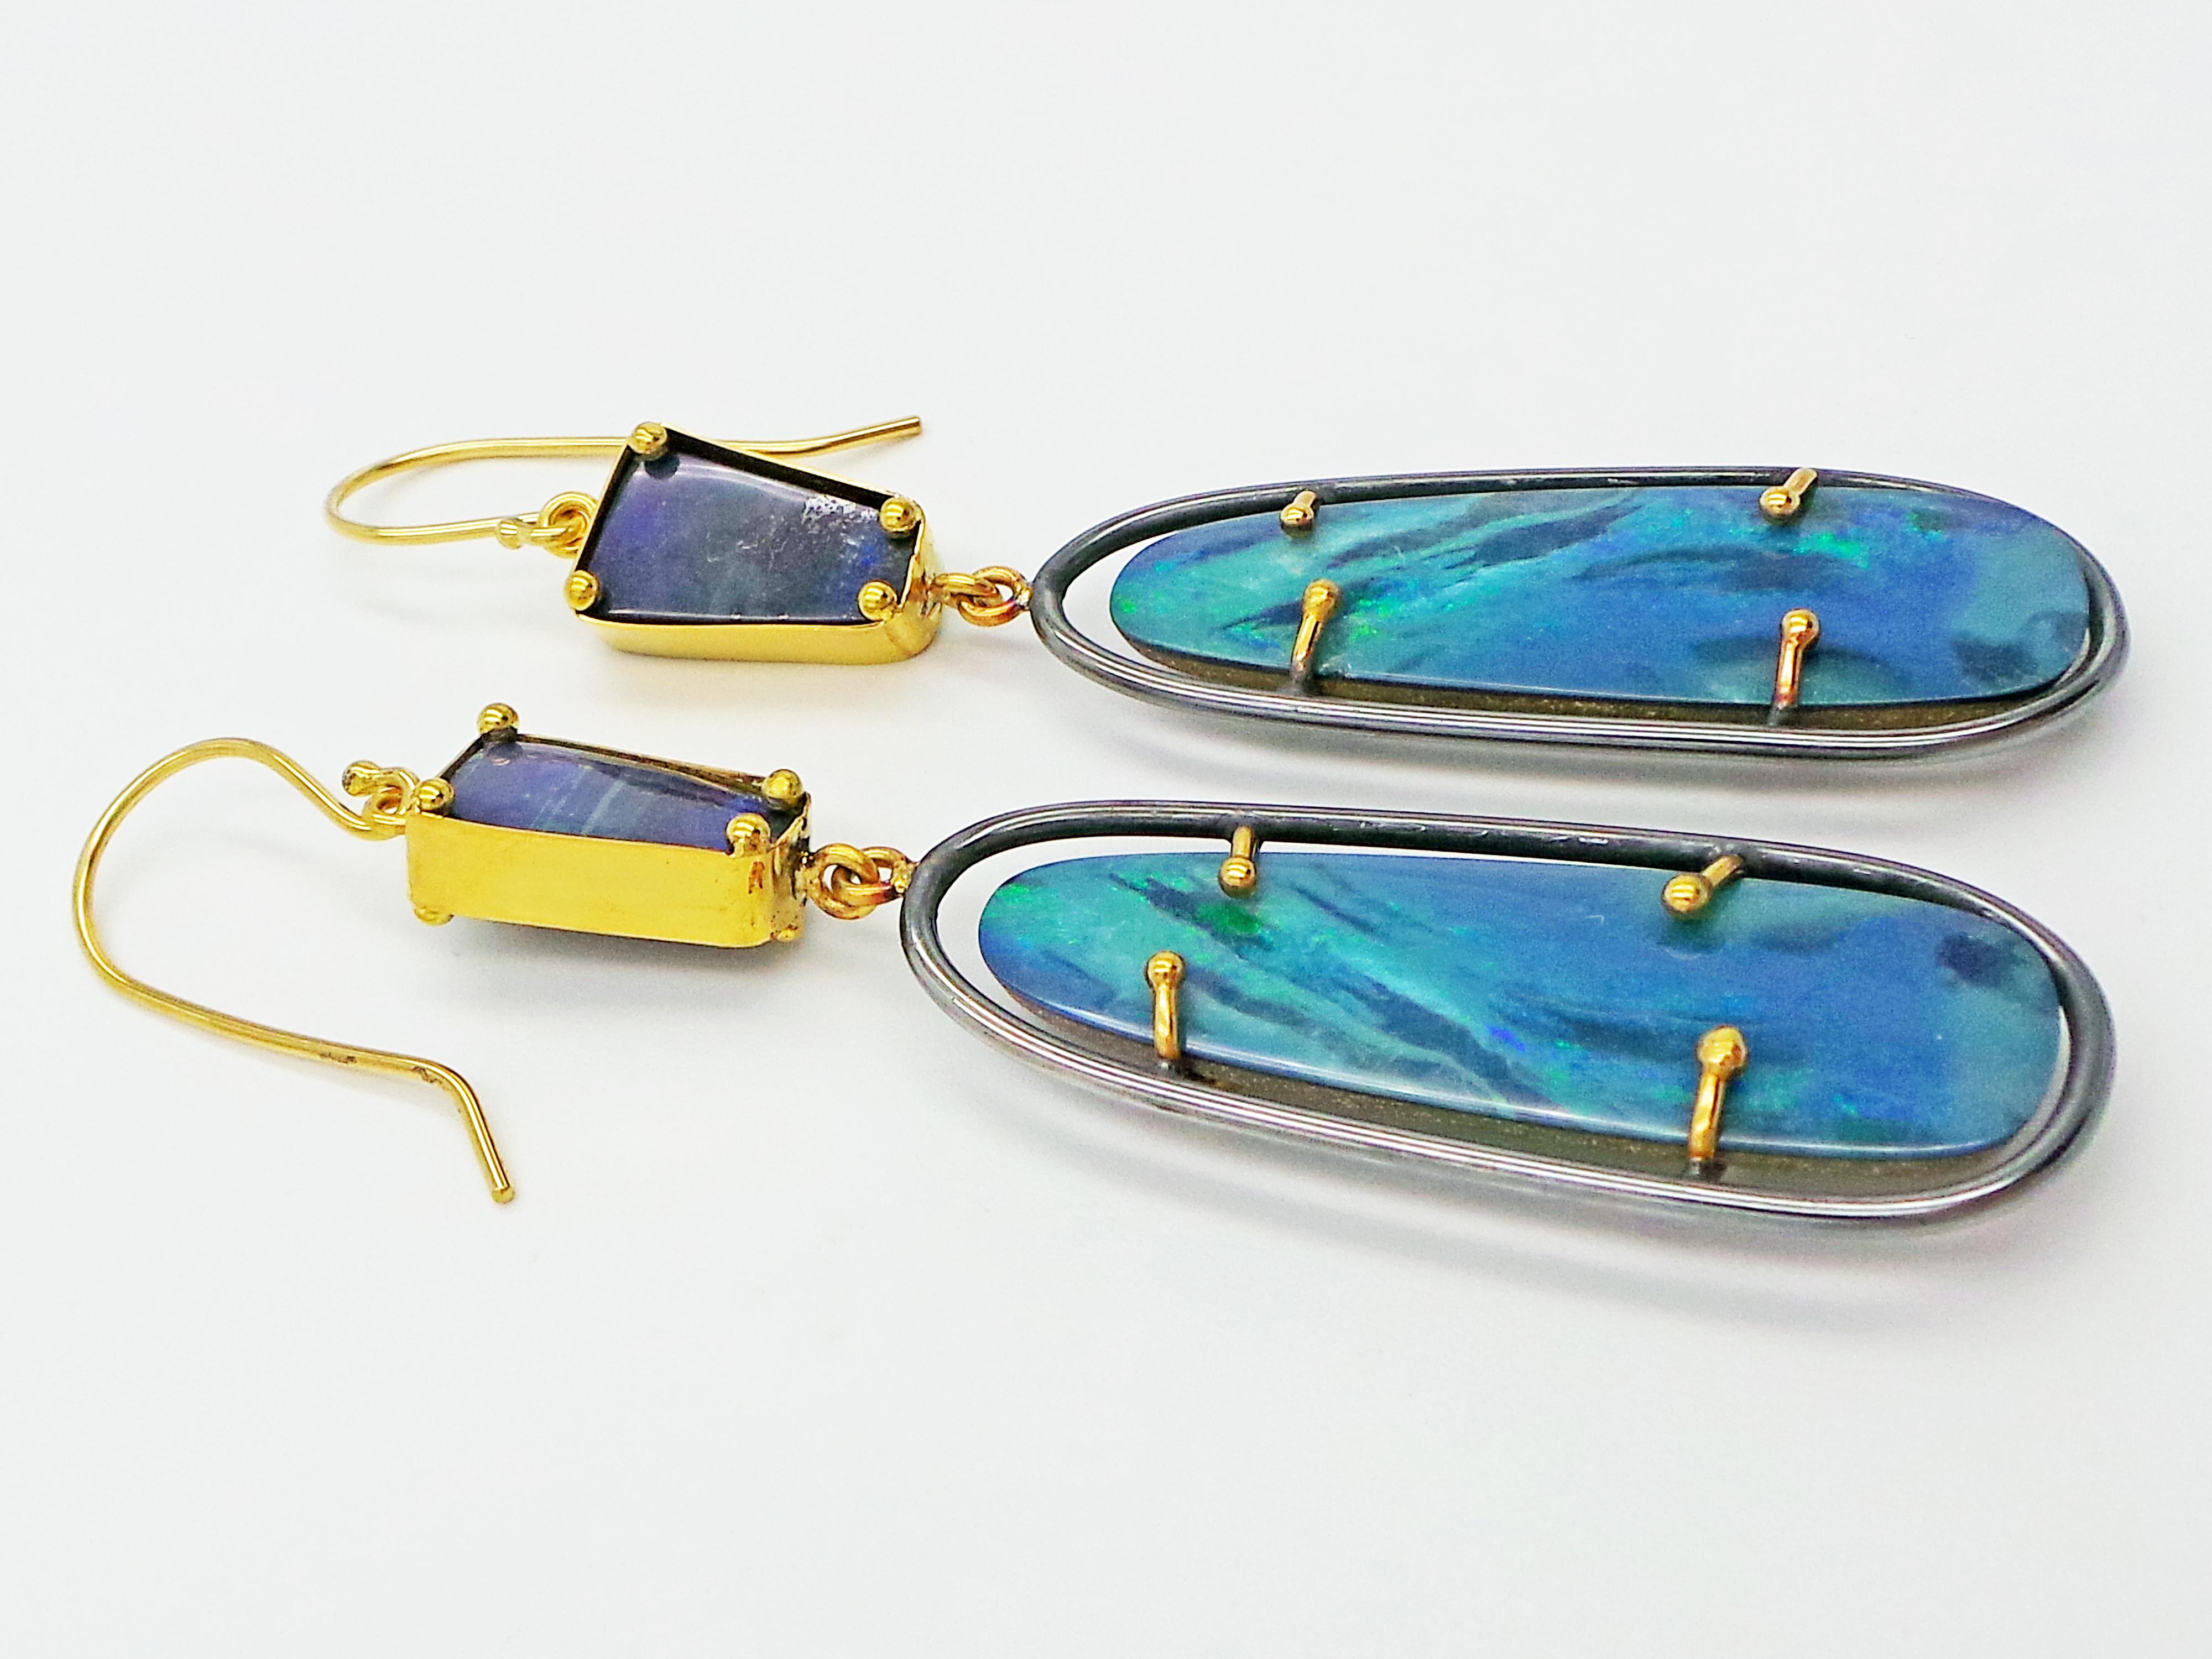 Oxidized sterling silver and 22k yellow gold hand-fabricated dangle earrings featuring amazing green blue Australian Boulder Opals. Unique, beautiful and one-of-a-kind artisan earrings.